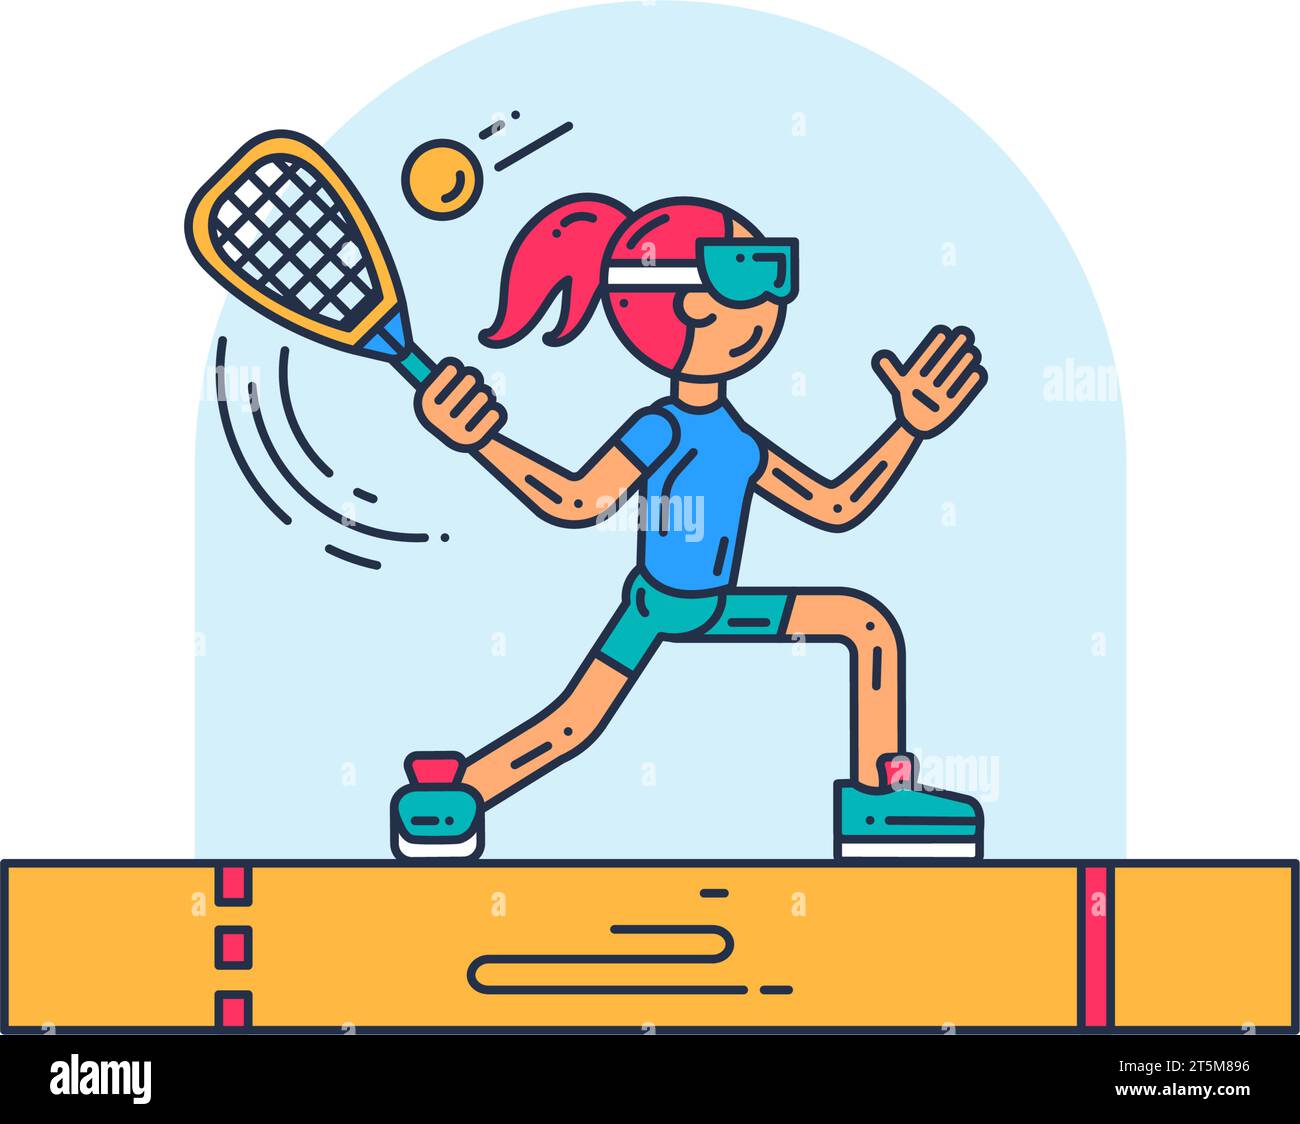 Young slender girl athlete in sportswear plays racquetball tennis with professional racket hitting ball. Sports and active lifestyle. Simple colored s Stock Vector